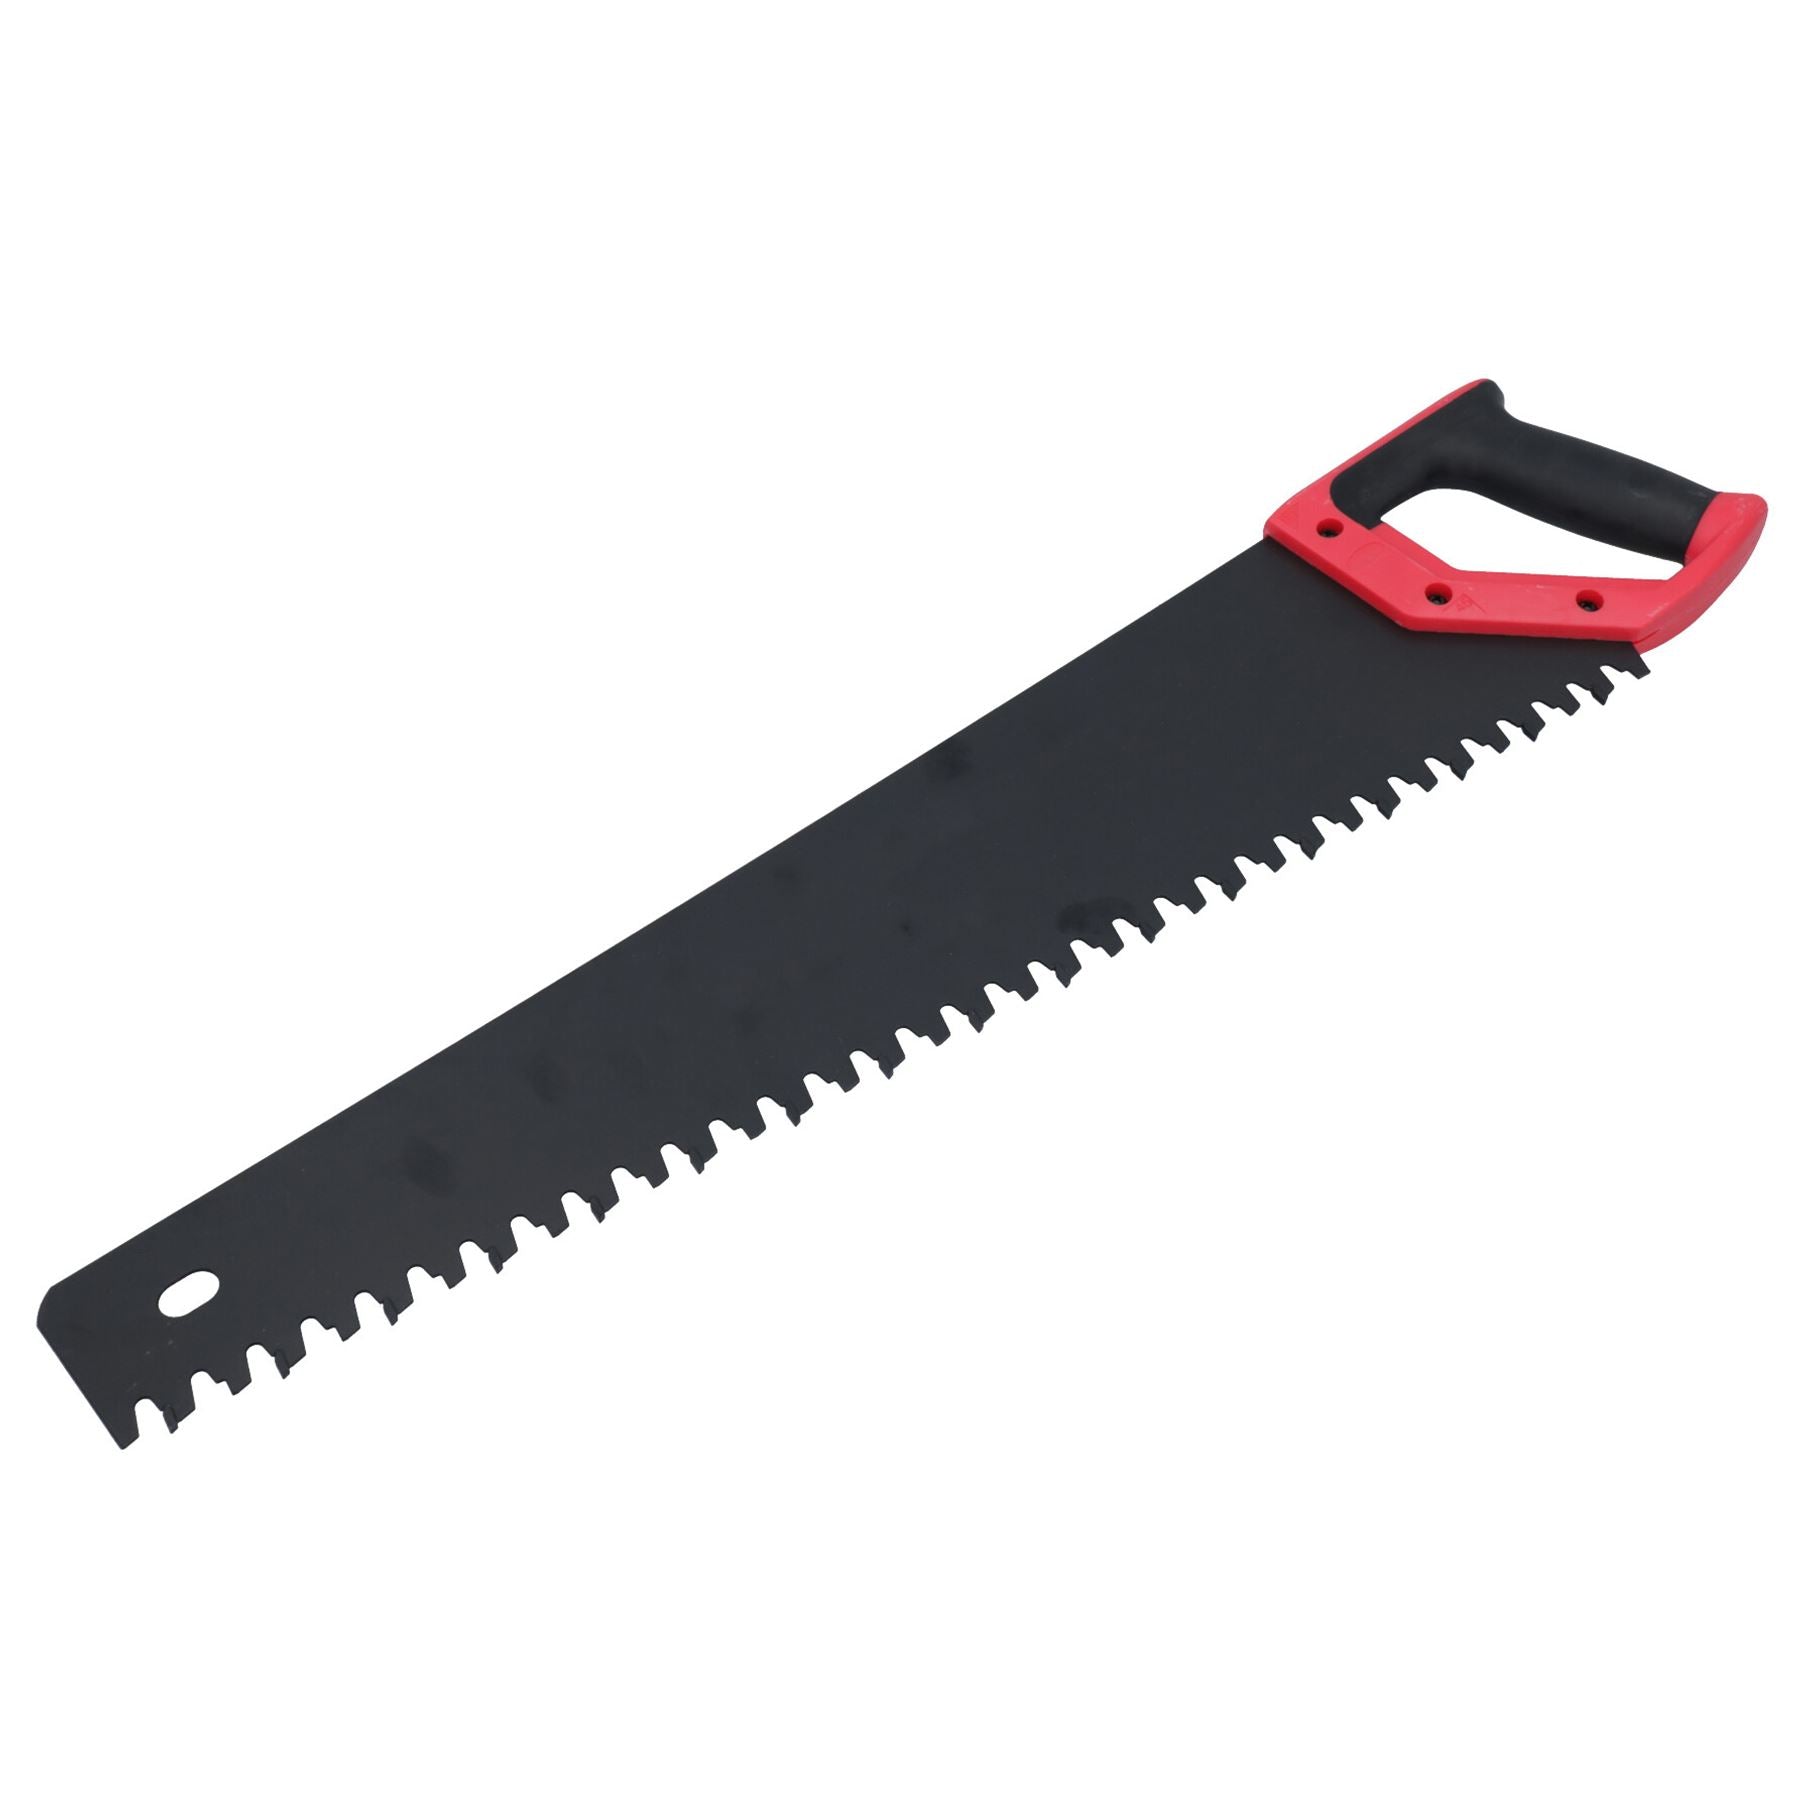 TCT (Tungsten Carbide Tipped) masonry saw for Brick Block Concrete 500mm 20in